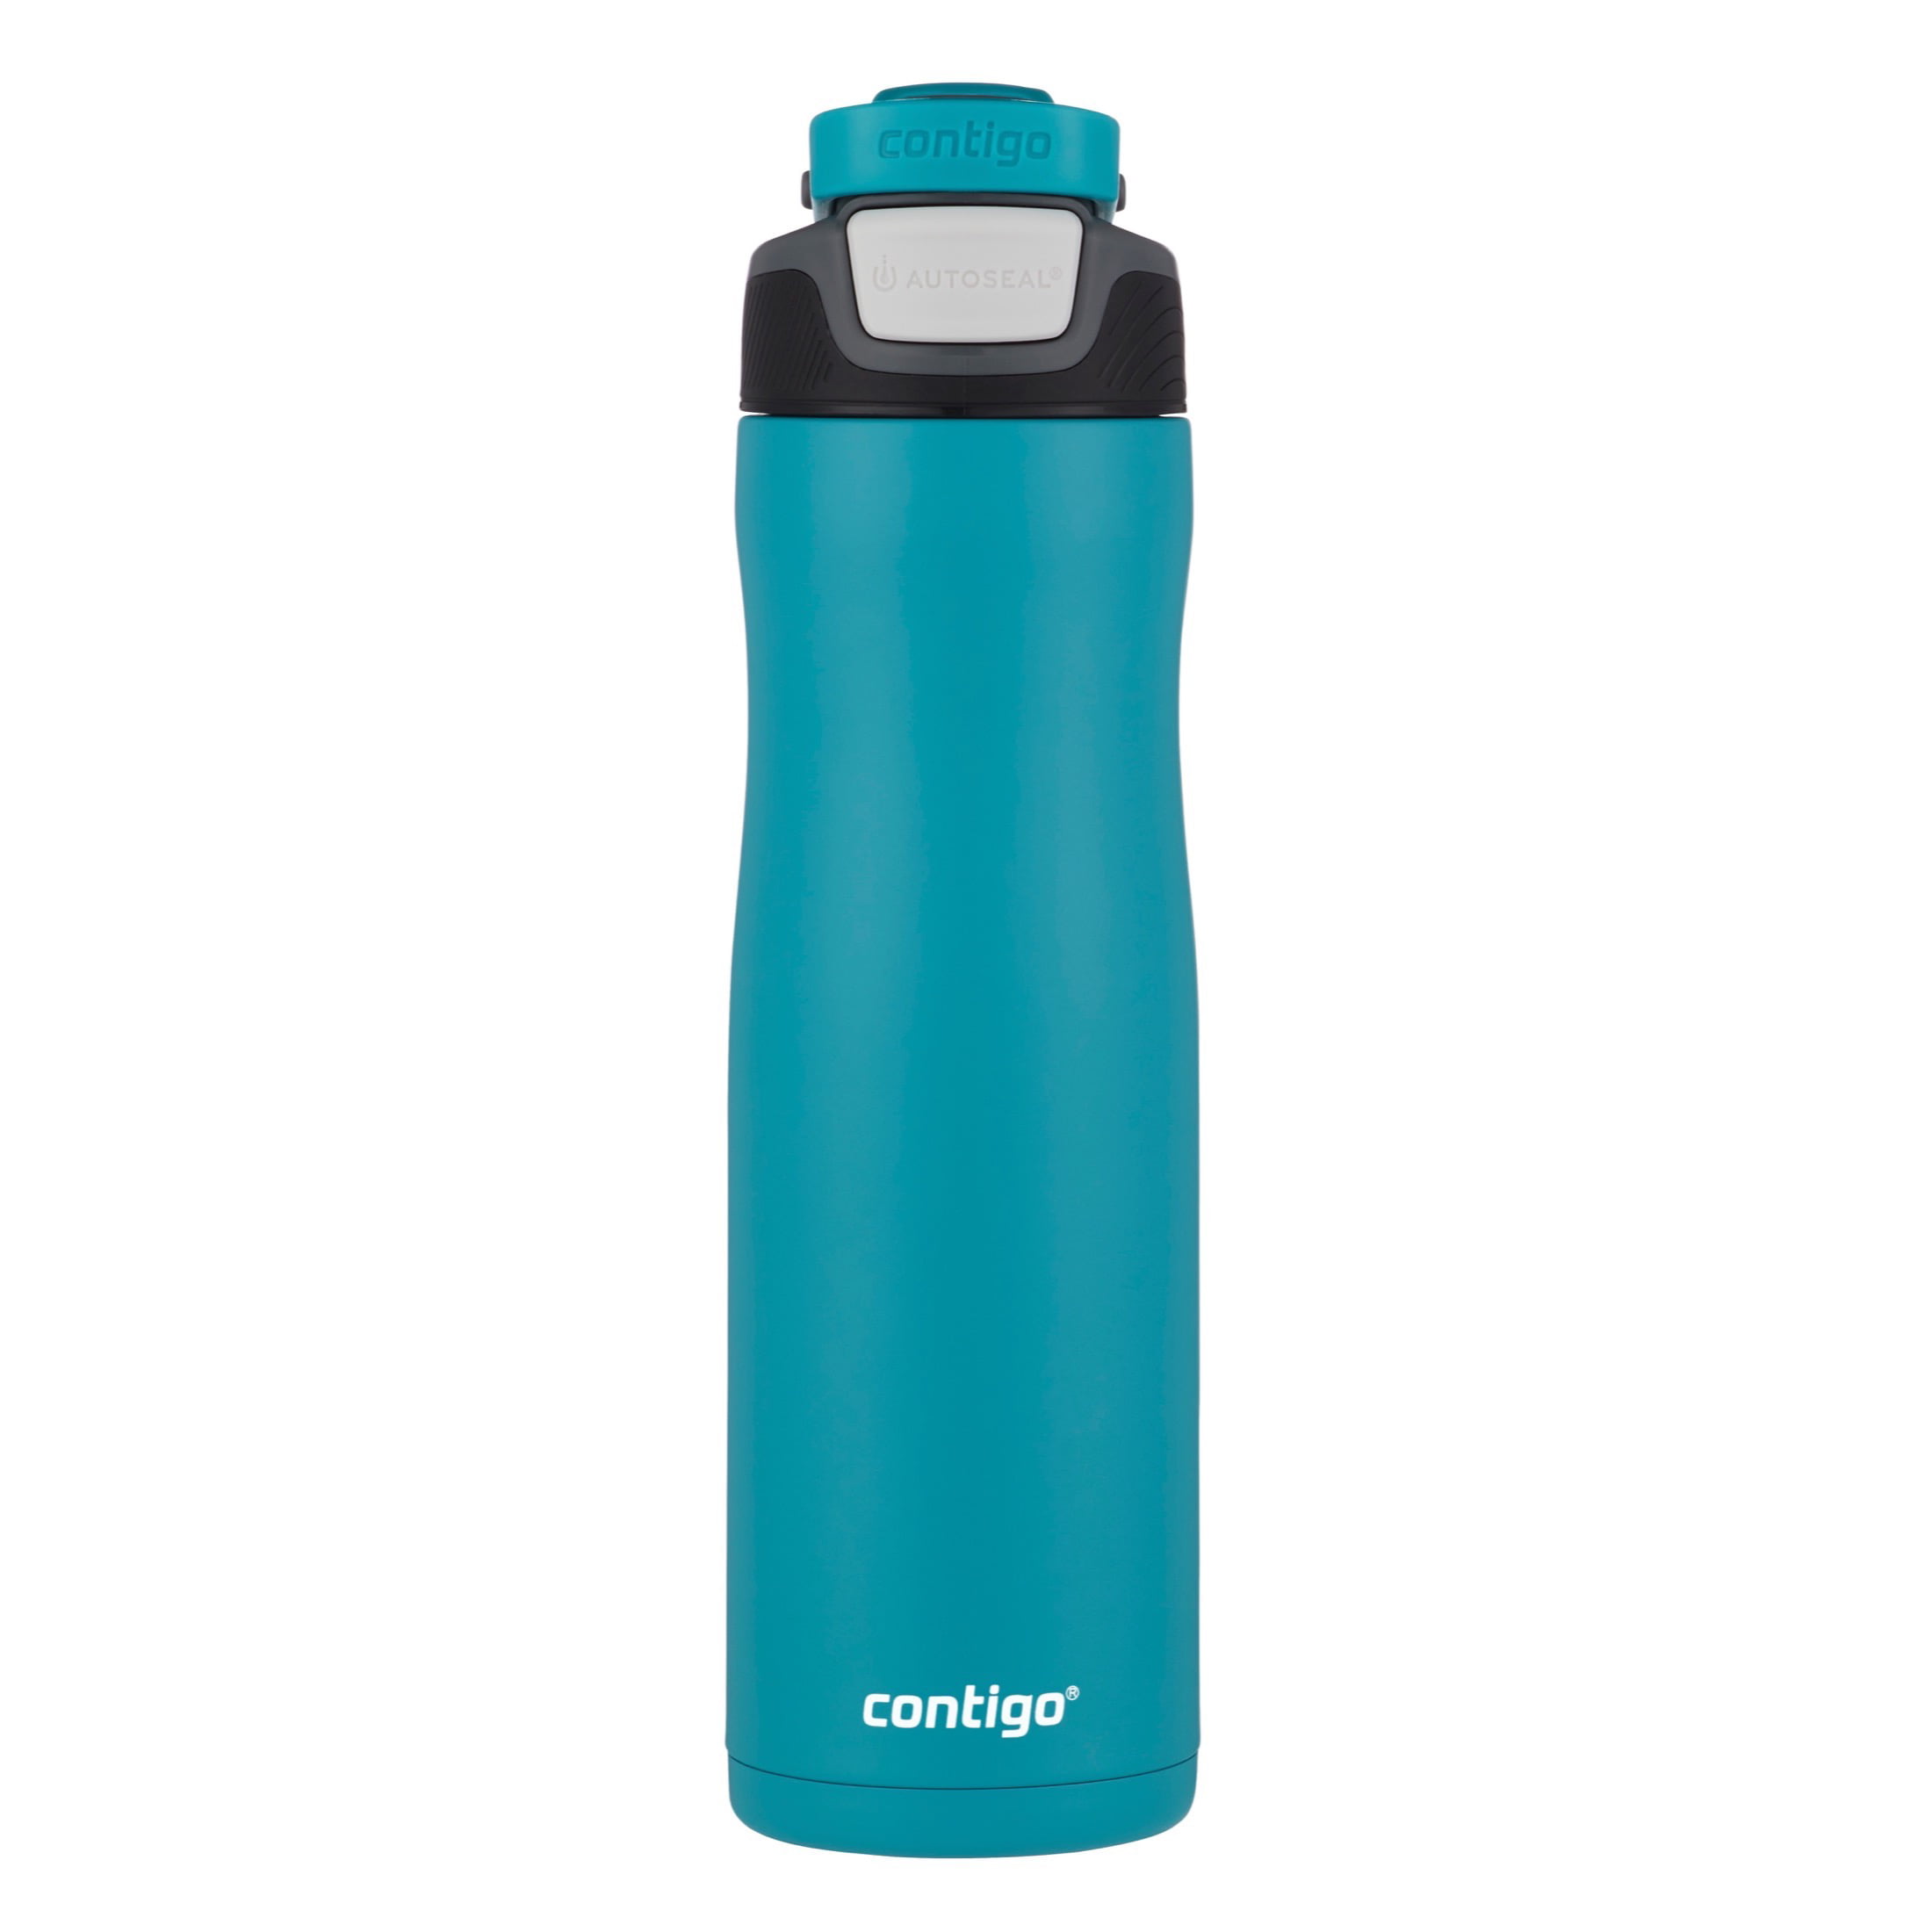 Contigo 24oz Autoseal Chill Vacuum-Insulated Stainless Steel Water